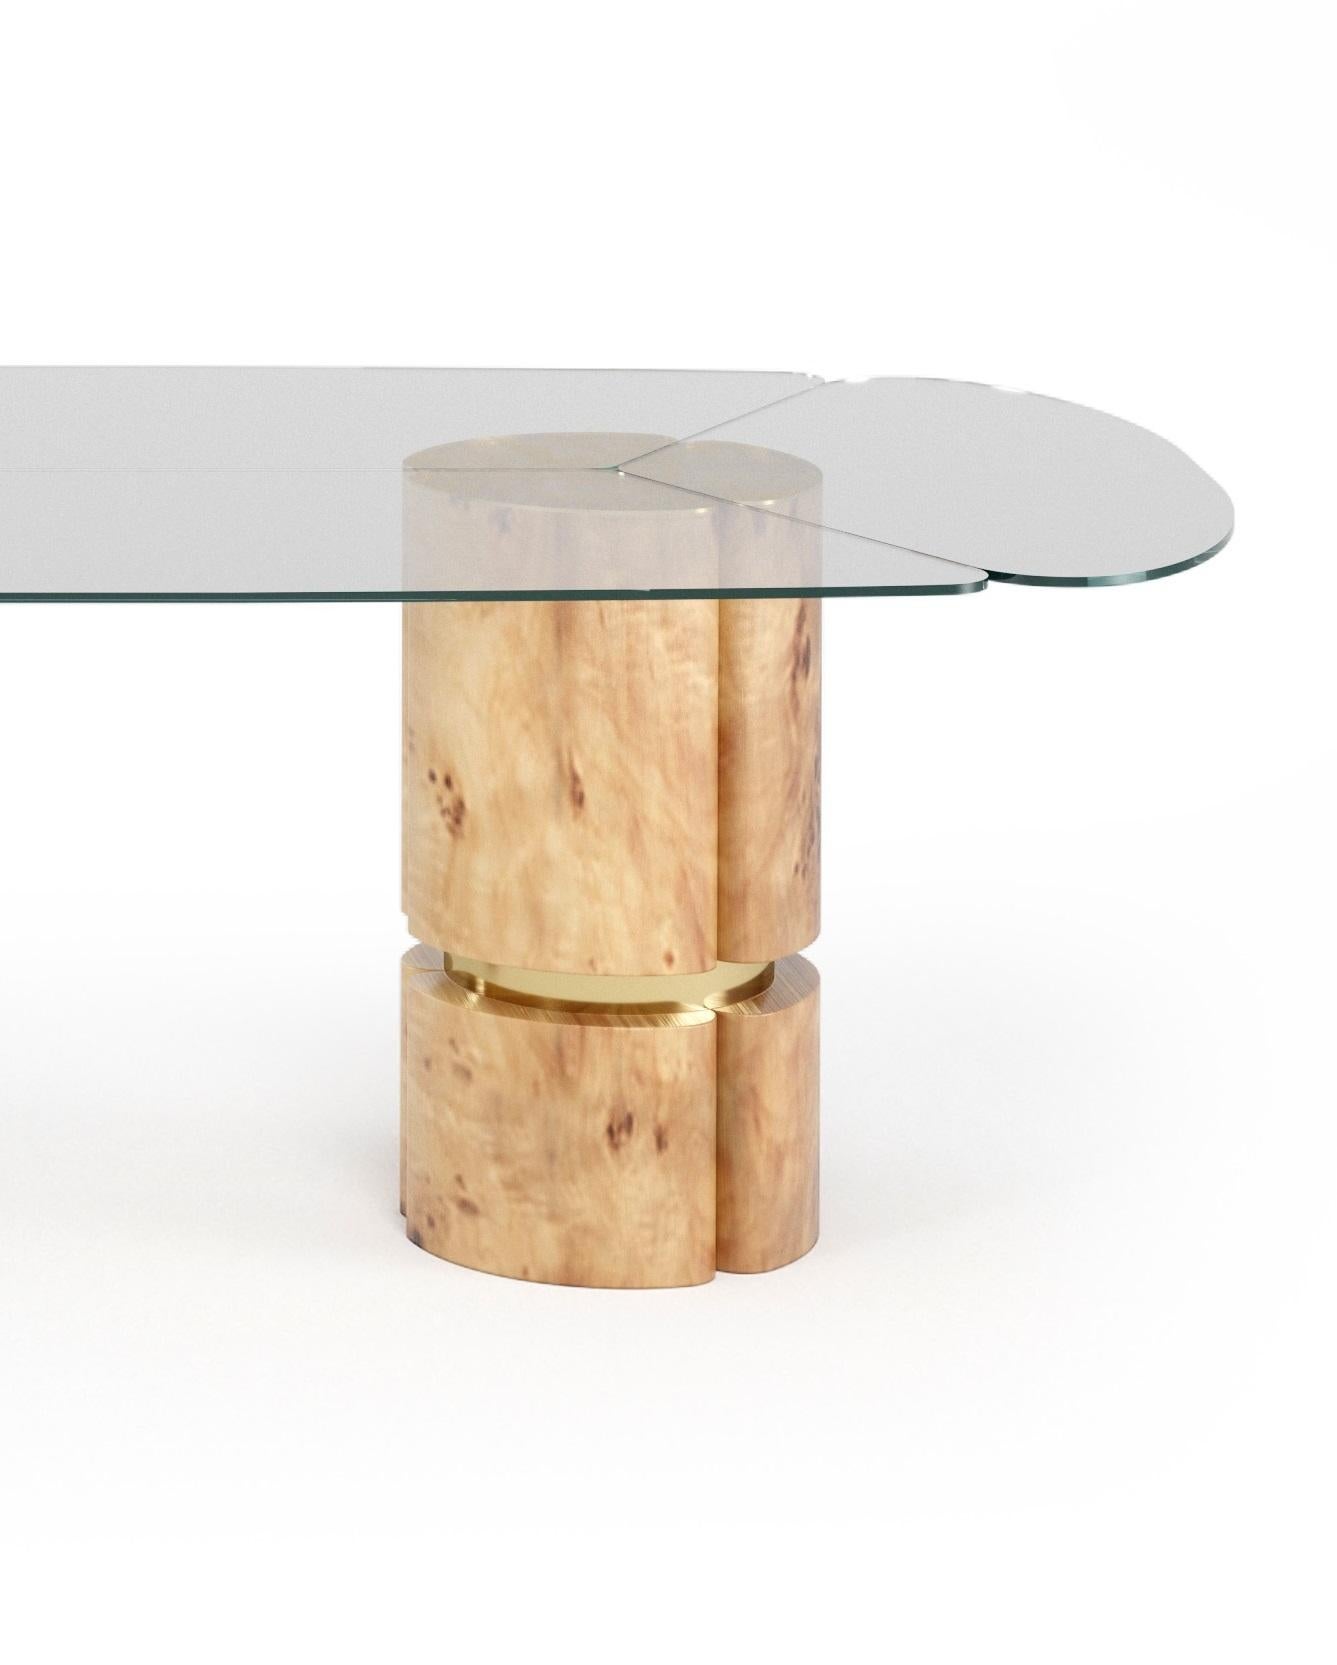 Euphoria Dining Table by Memoir Essence
Dimensions: D 120 x W 260 x H 76 cm.
Materials: Polished brass, lacquer and glass.

Also available in brushed brass. Please contact us. 

Dynamic, and classy, this is a new version for Euphoria Collection.